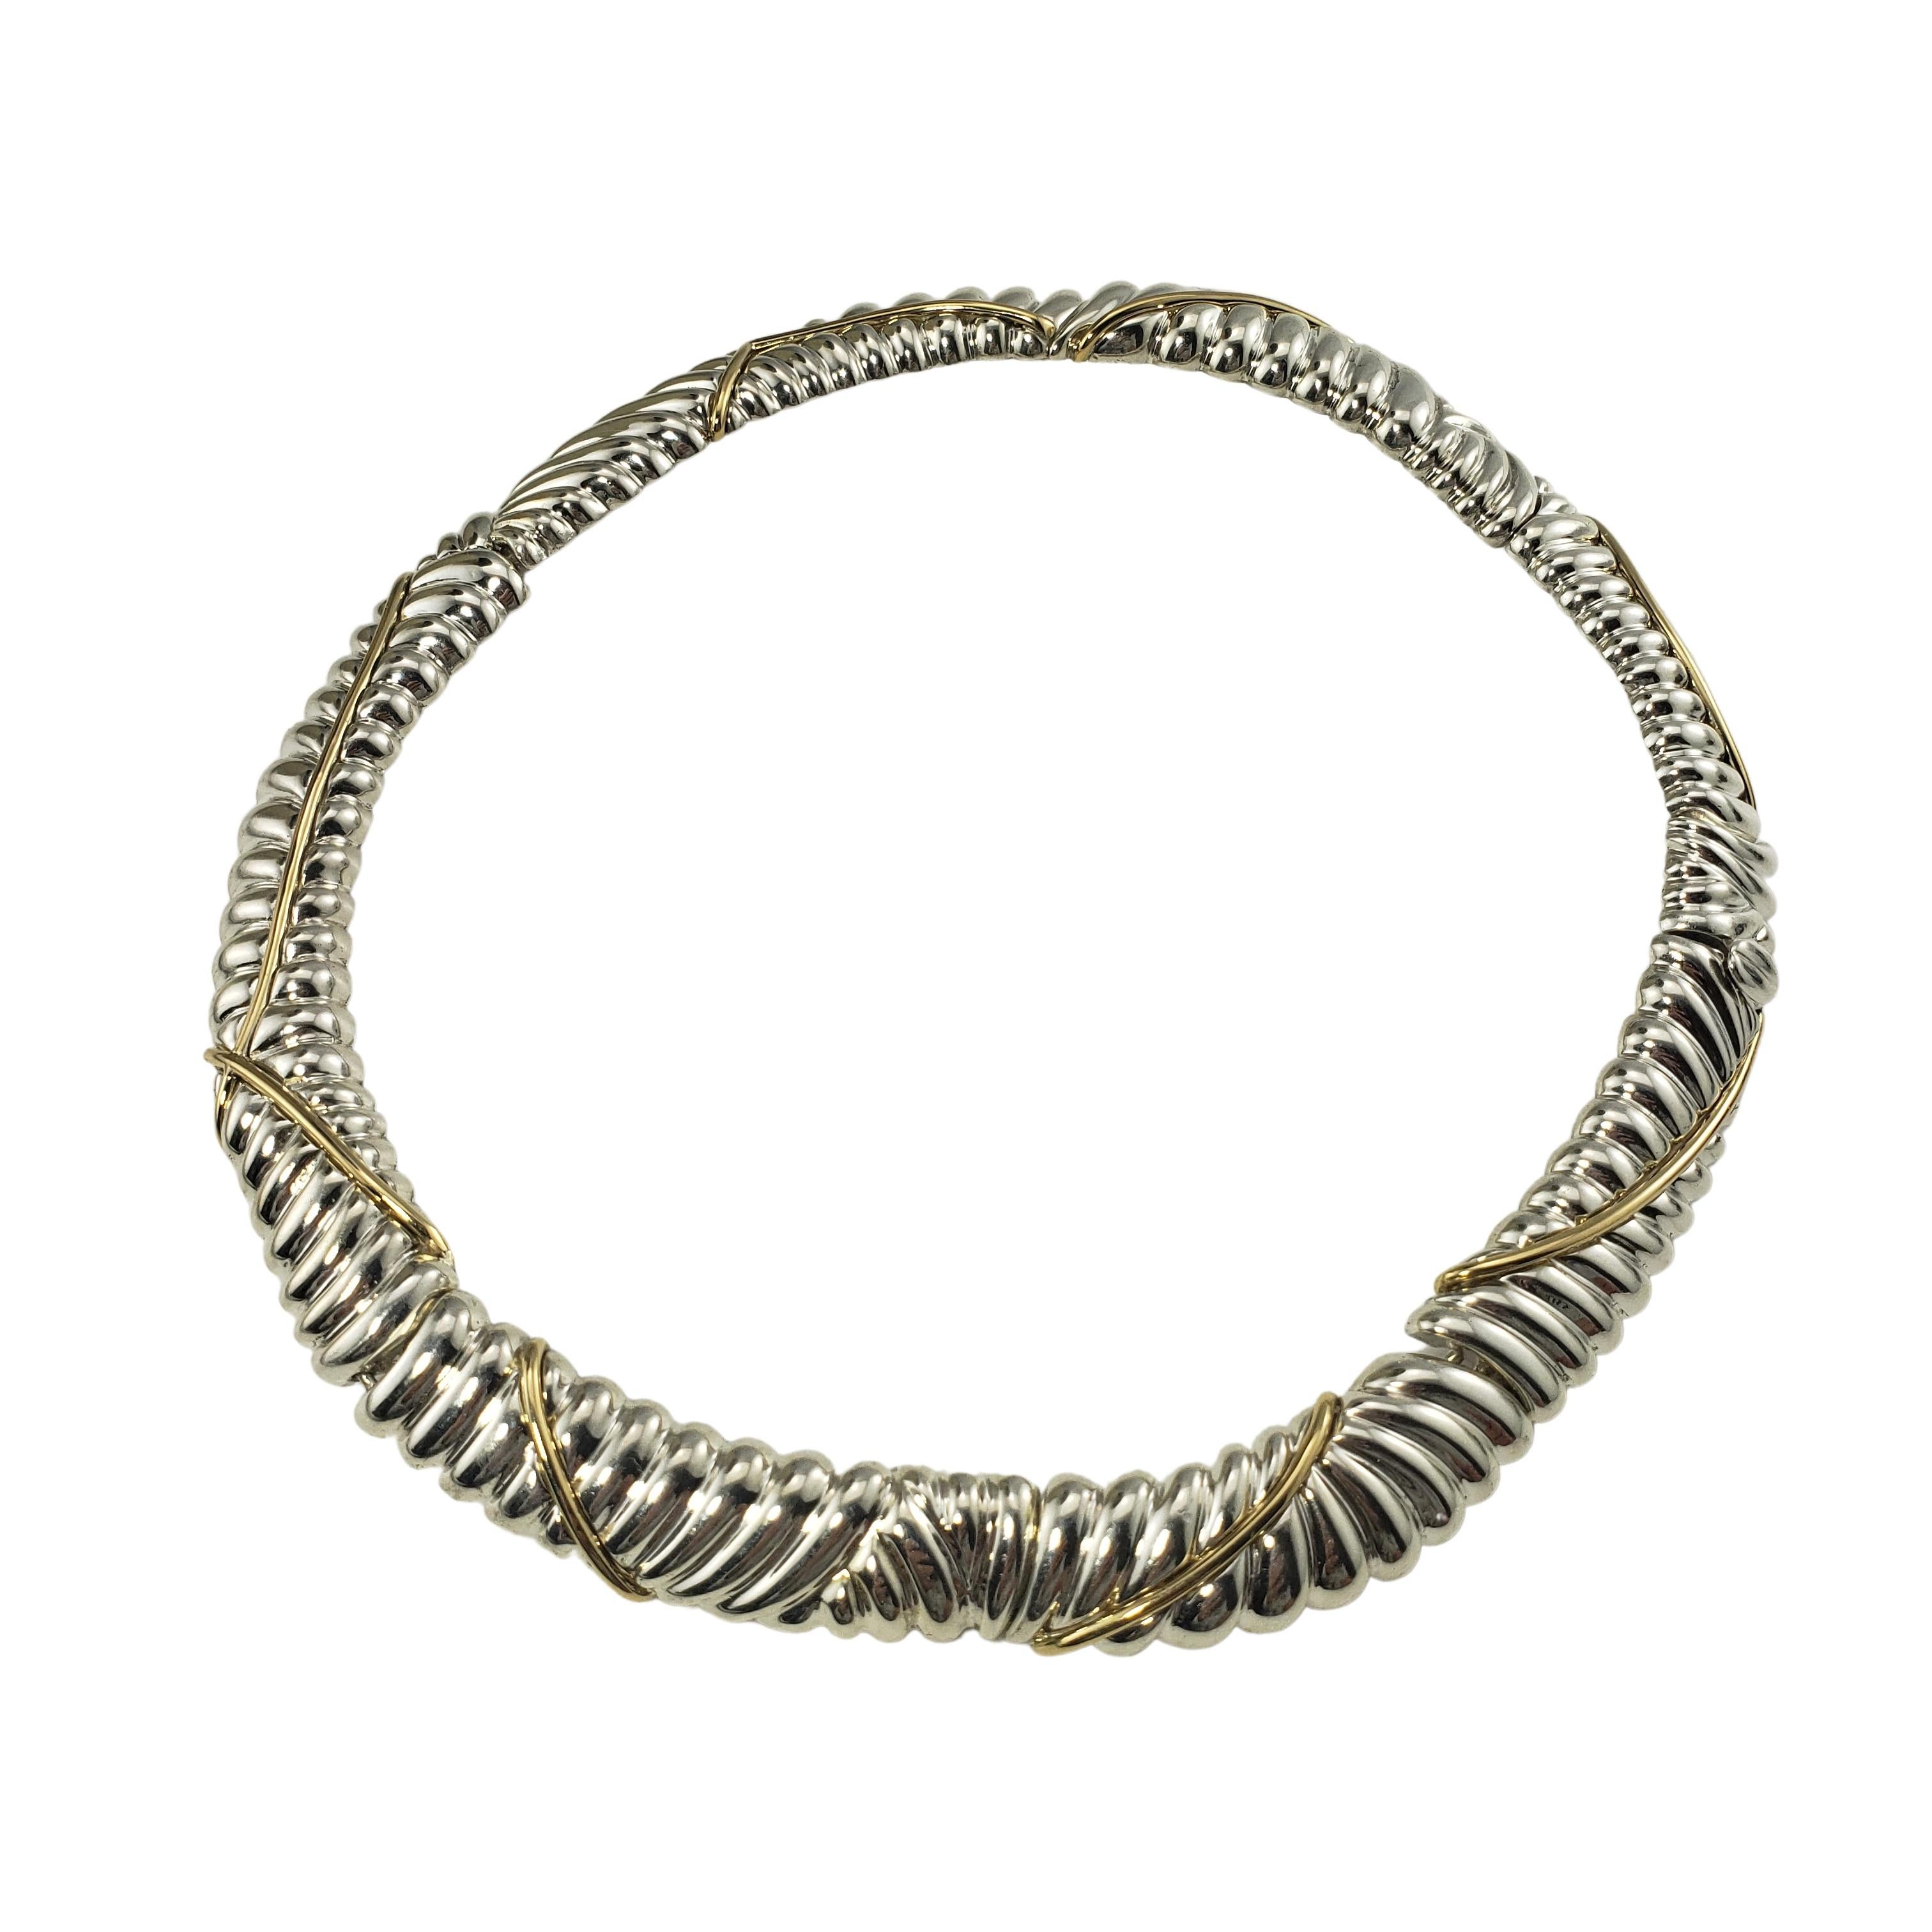 Tiffany & Co. Sterling Silver and 18 Karat Yellow Gold Choker Necklace-

This stunning necklace is crafted in beautifully detailed sterling silver and accented with 18K yellow gold.  Width:  15 mm

Size:  17 inches

Weight:    60.9 dwt. /   94.8